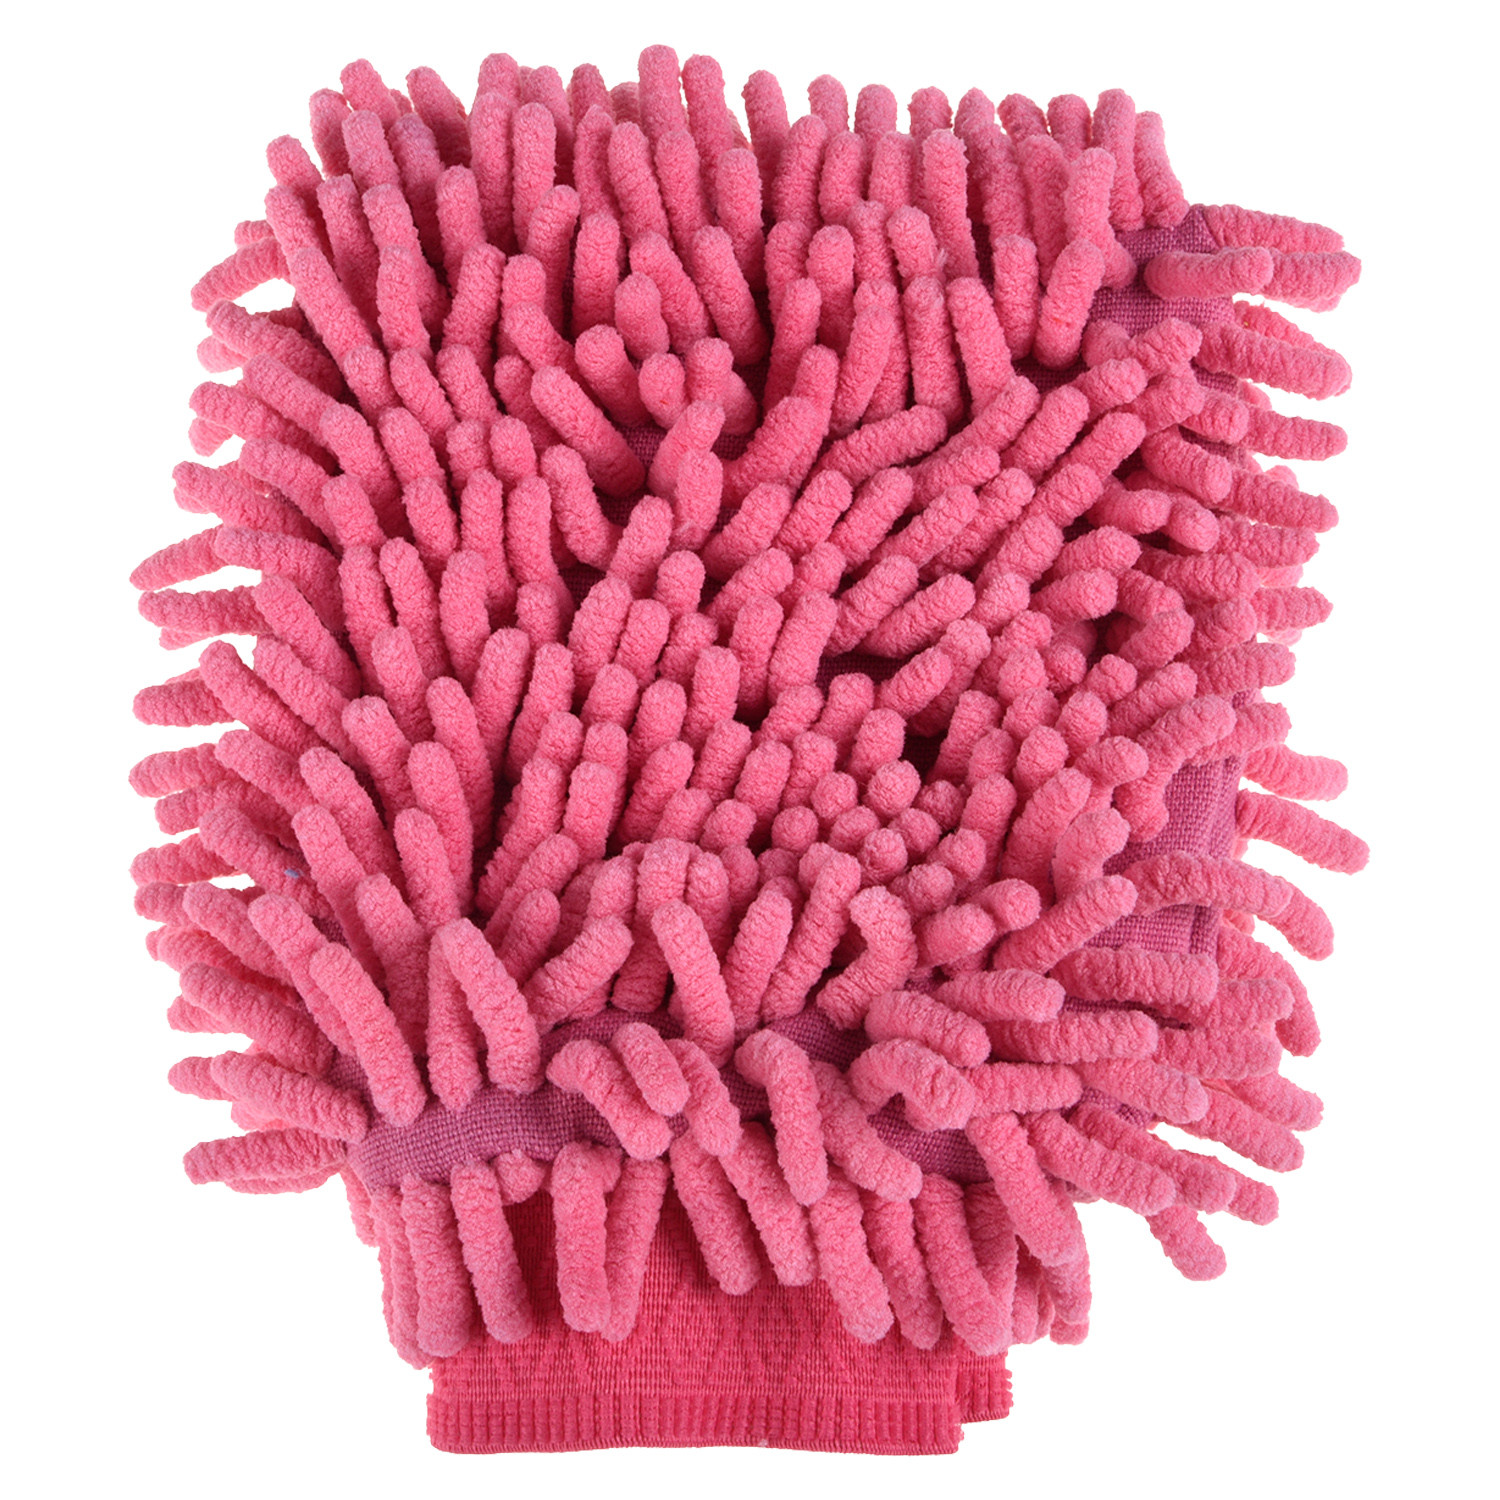 Kuber Industries Chenille Mitts|Microfiber Cleaning Gloves|Inside Waterproof Cloth Gloves|100 Gram Weighted Hand Duster|Chenille Gloves For Car|Glass|Pack of 2 (Pink & Dark Pink)